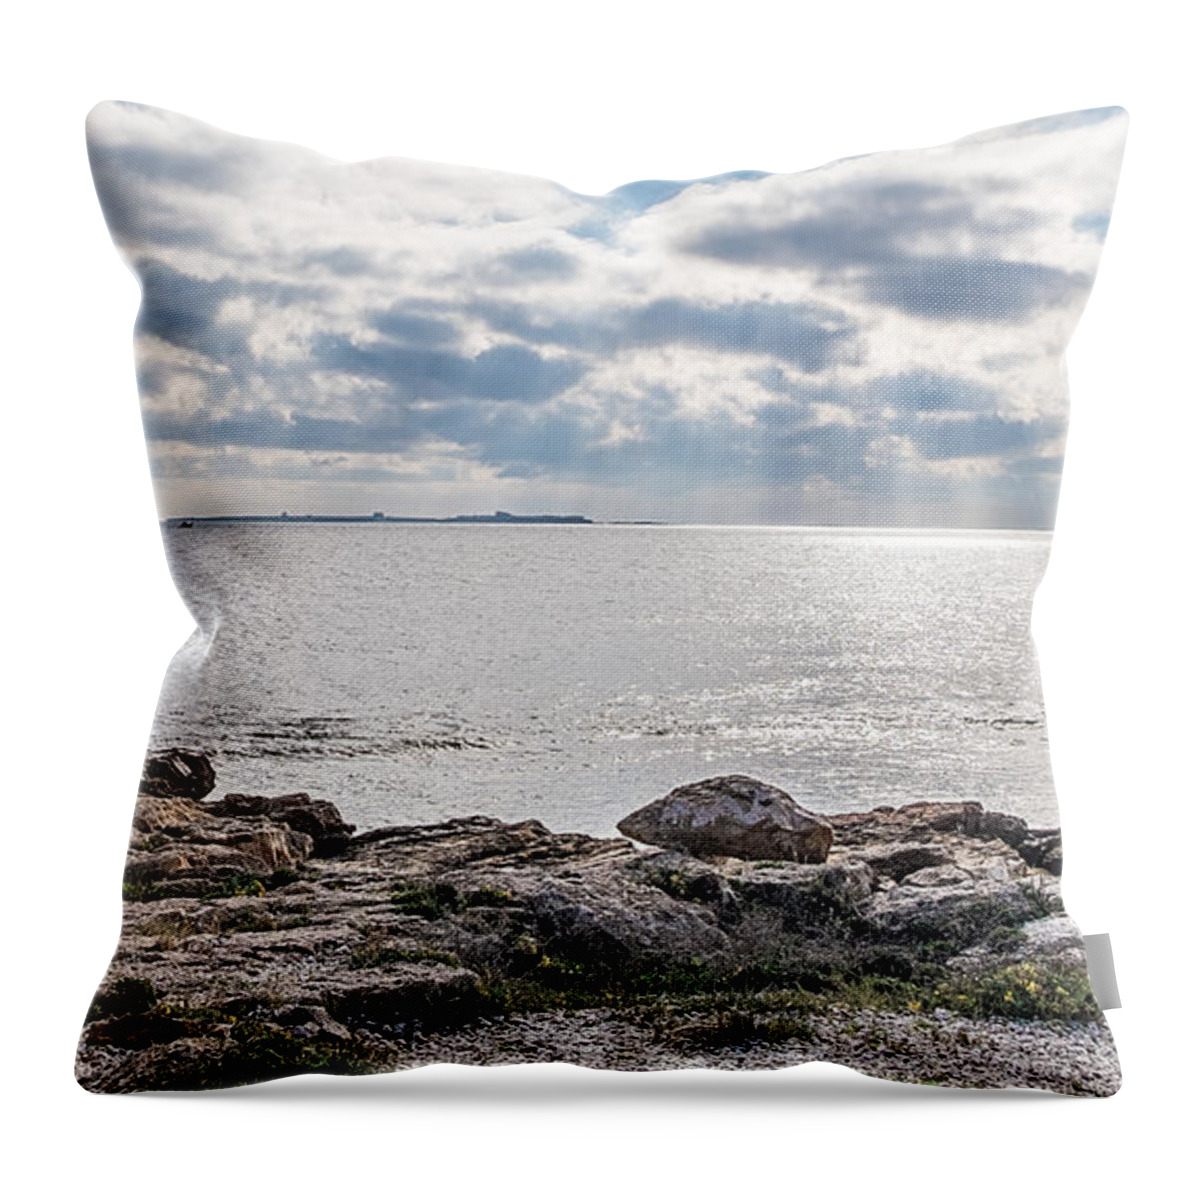 Landscape Throw Pillow featuring the photograph Isla Plana by Eugenio Moya